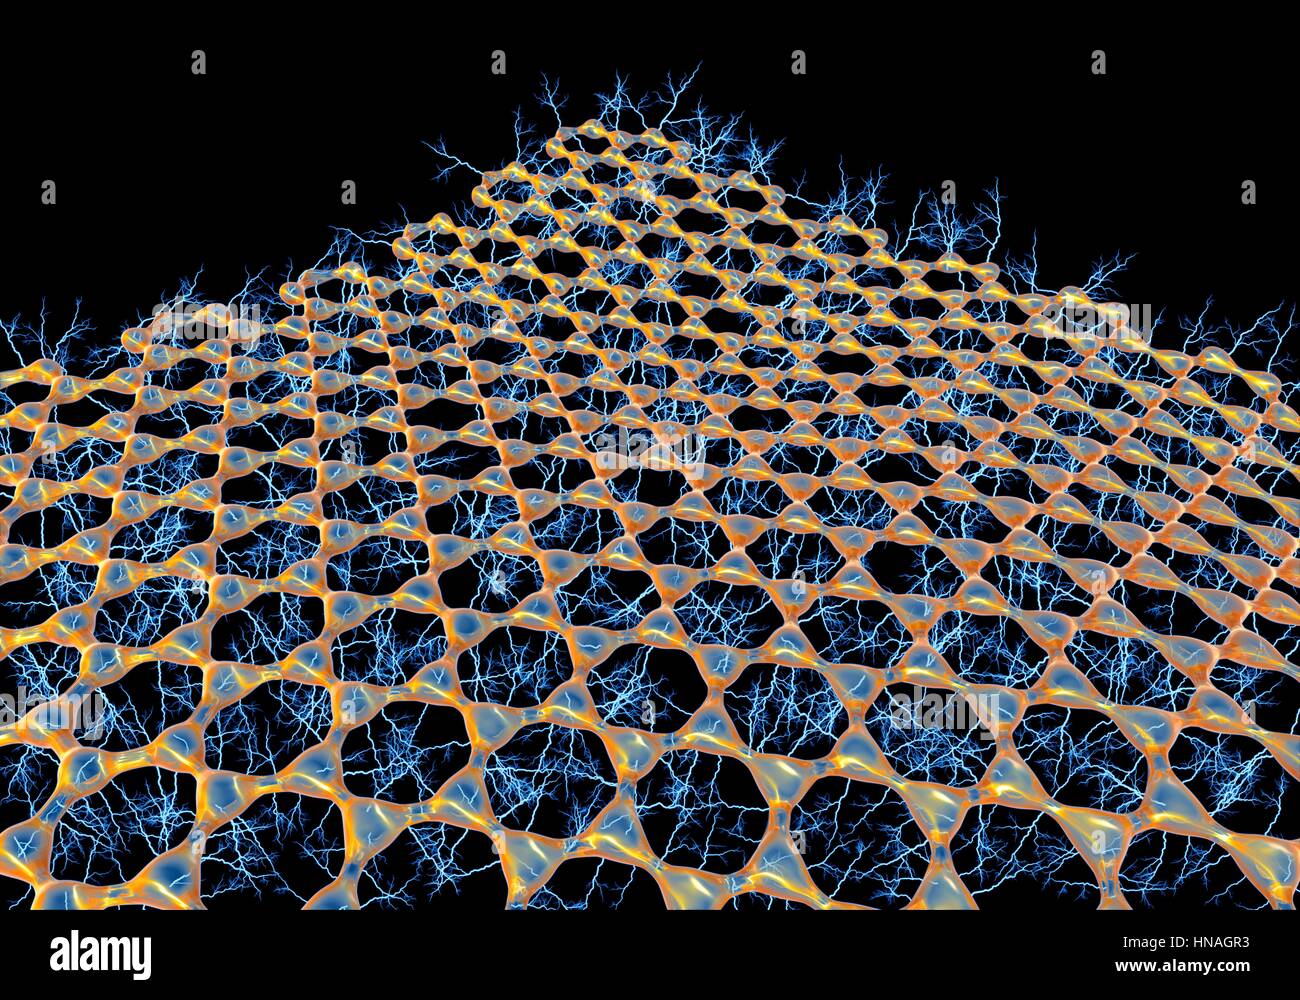 Graphene sheet. Illustration of the atomic-scale molecular structure of graphene, a single hexagonal layer of graphite. It is composed of hexagonally arranged carbon atoms linked by strong covalent bonds. Graphene is very strong and flexible. It transports electrons highly efficiently. The underlying thunderbolts indicate this ability. One day graphene my replace silicon in computer chips and other technology applications. Stock Photo